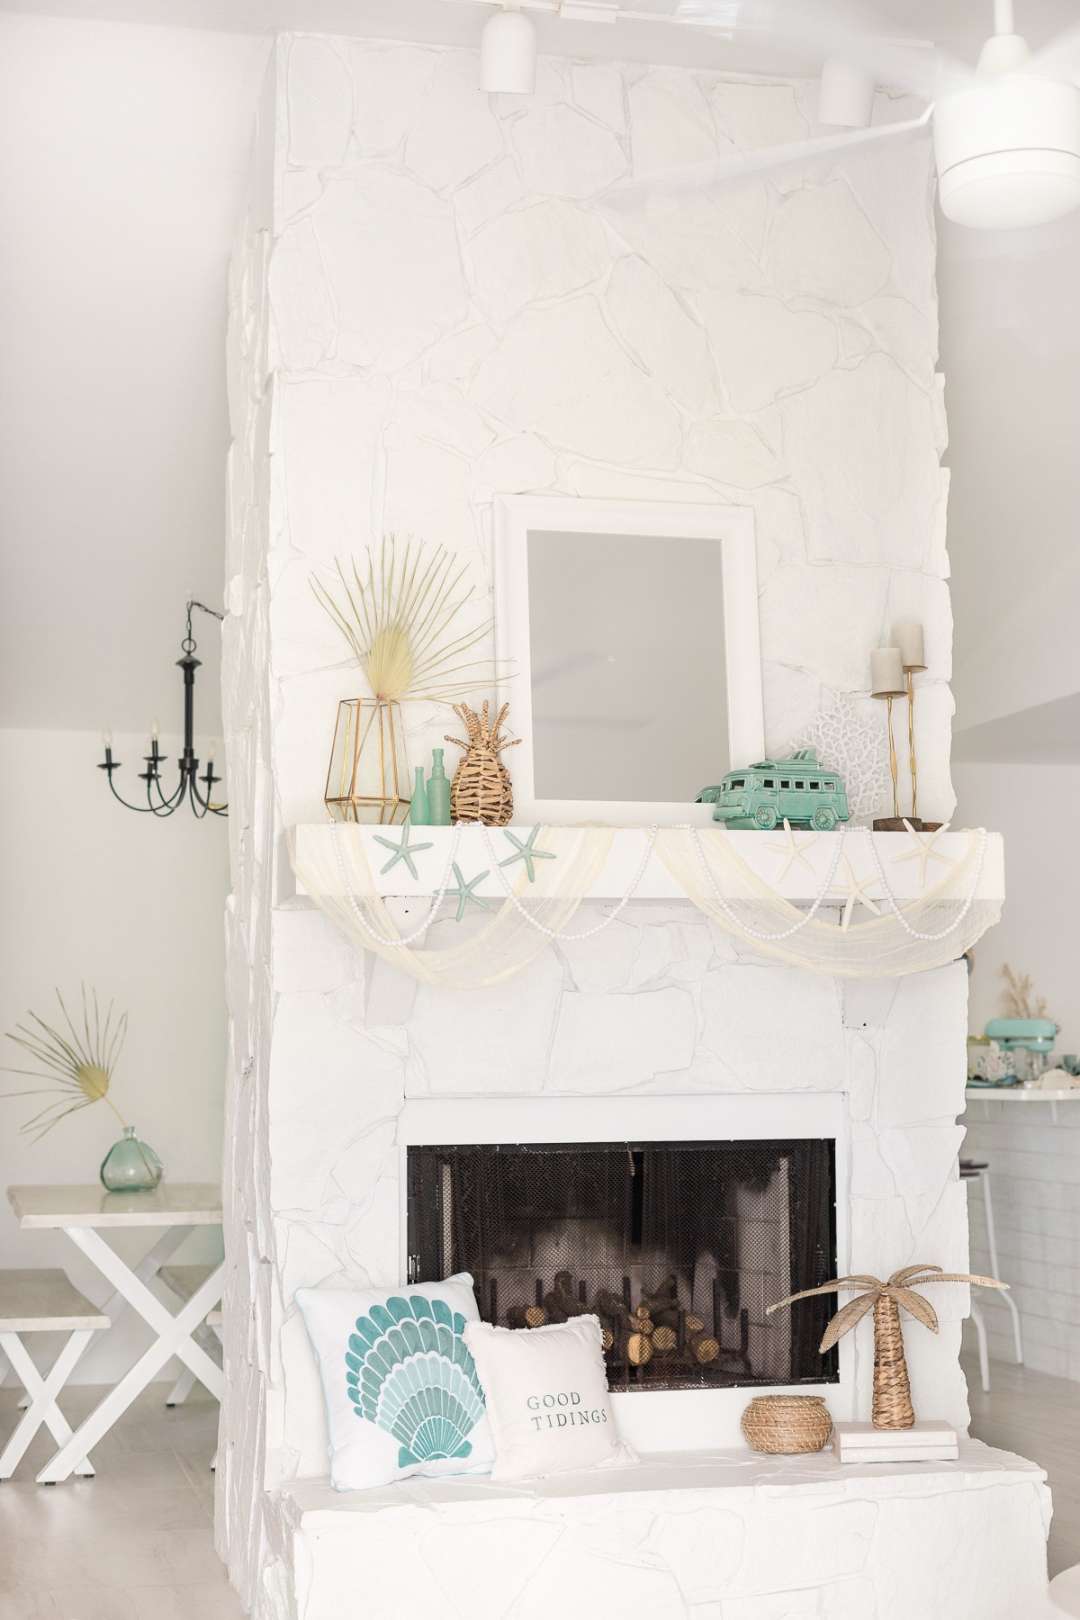 Painting A Stone Fireplace Guide - How To Paint A Fireplace